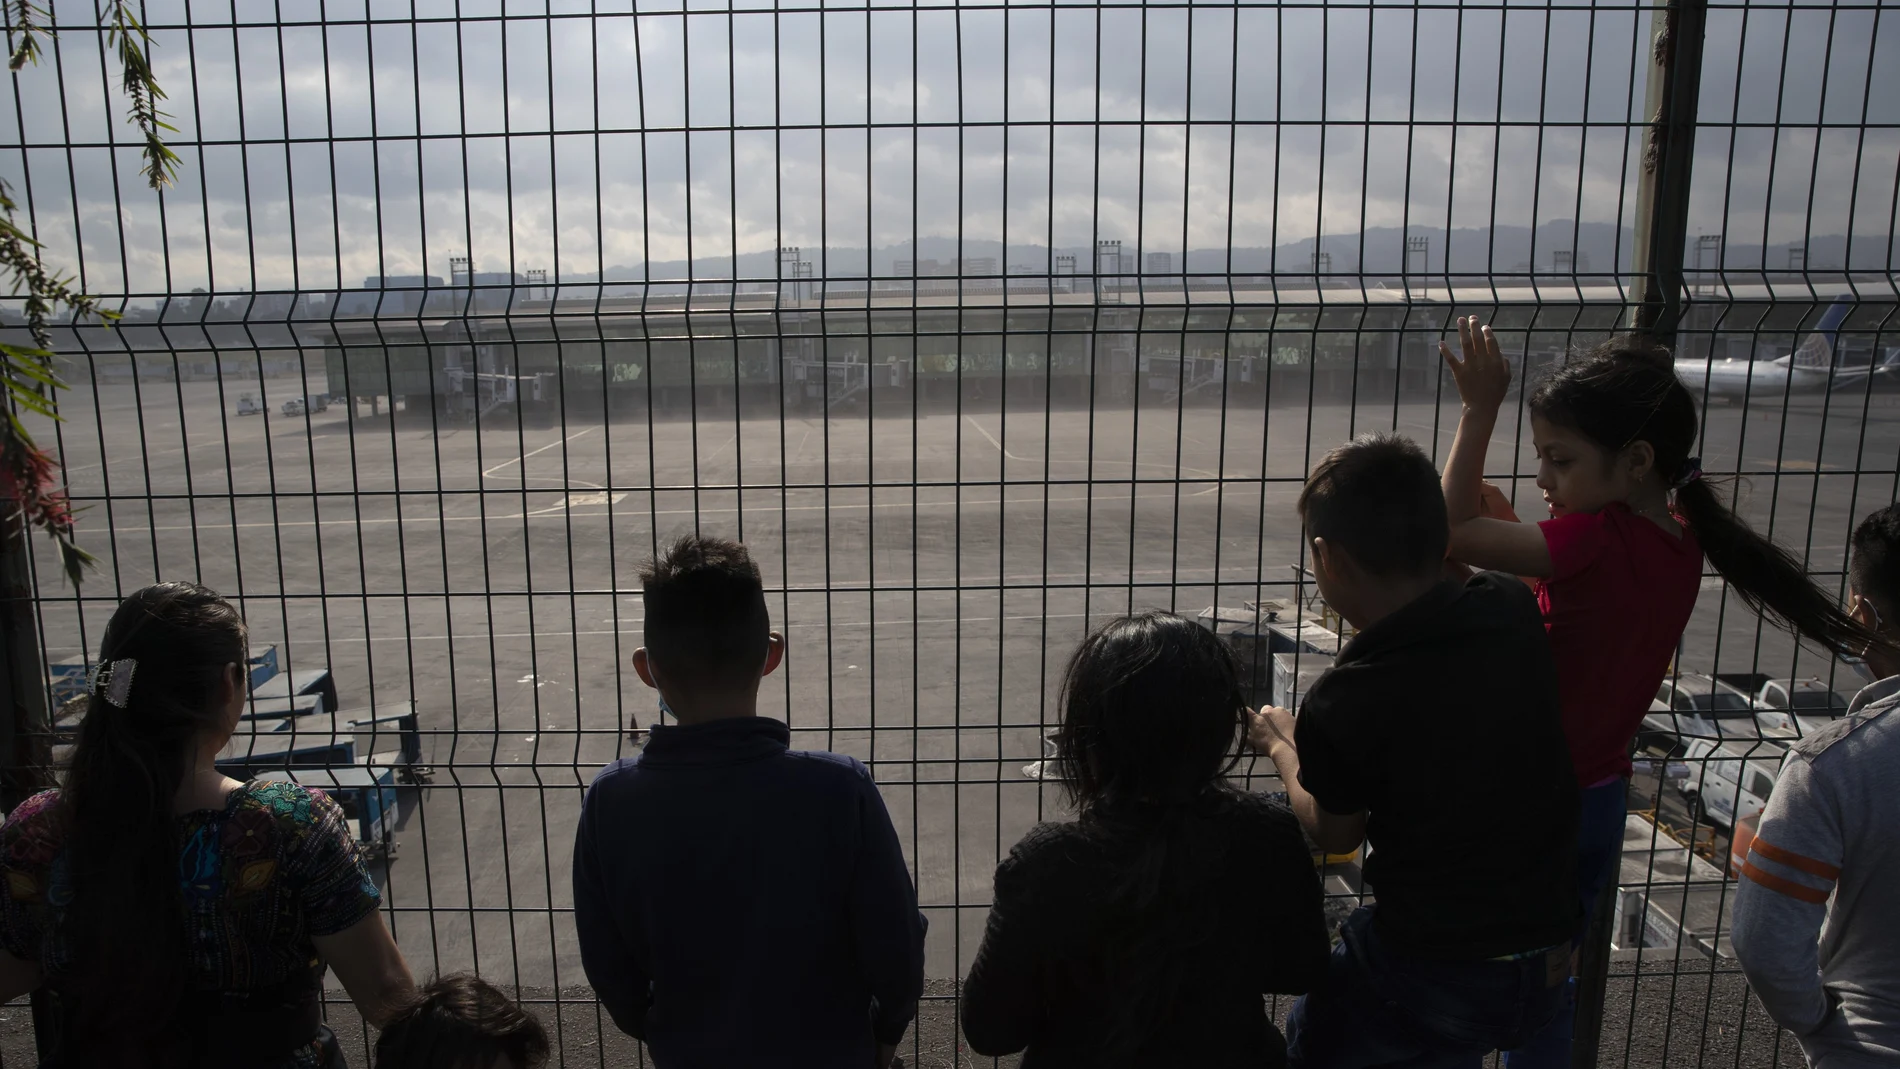 People look at planes parked at the La Aurora international airport which has been closed due to an eruption at the Pacaya volcano in Guatemala City, Tuesday, March 23, 2021. (AP Photo/Moises Castillo